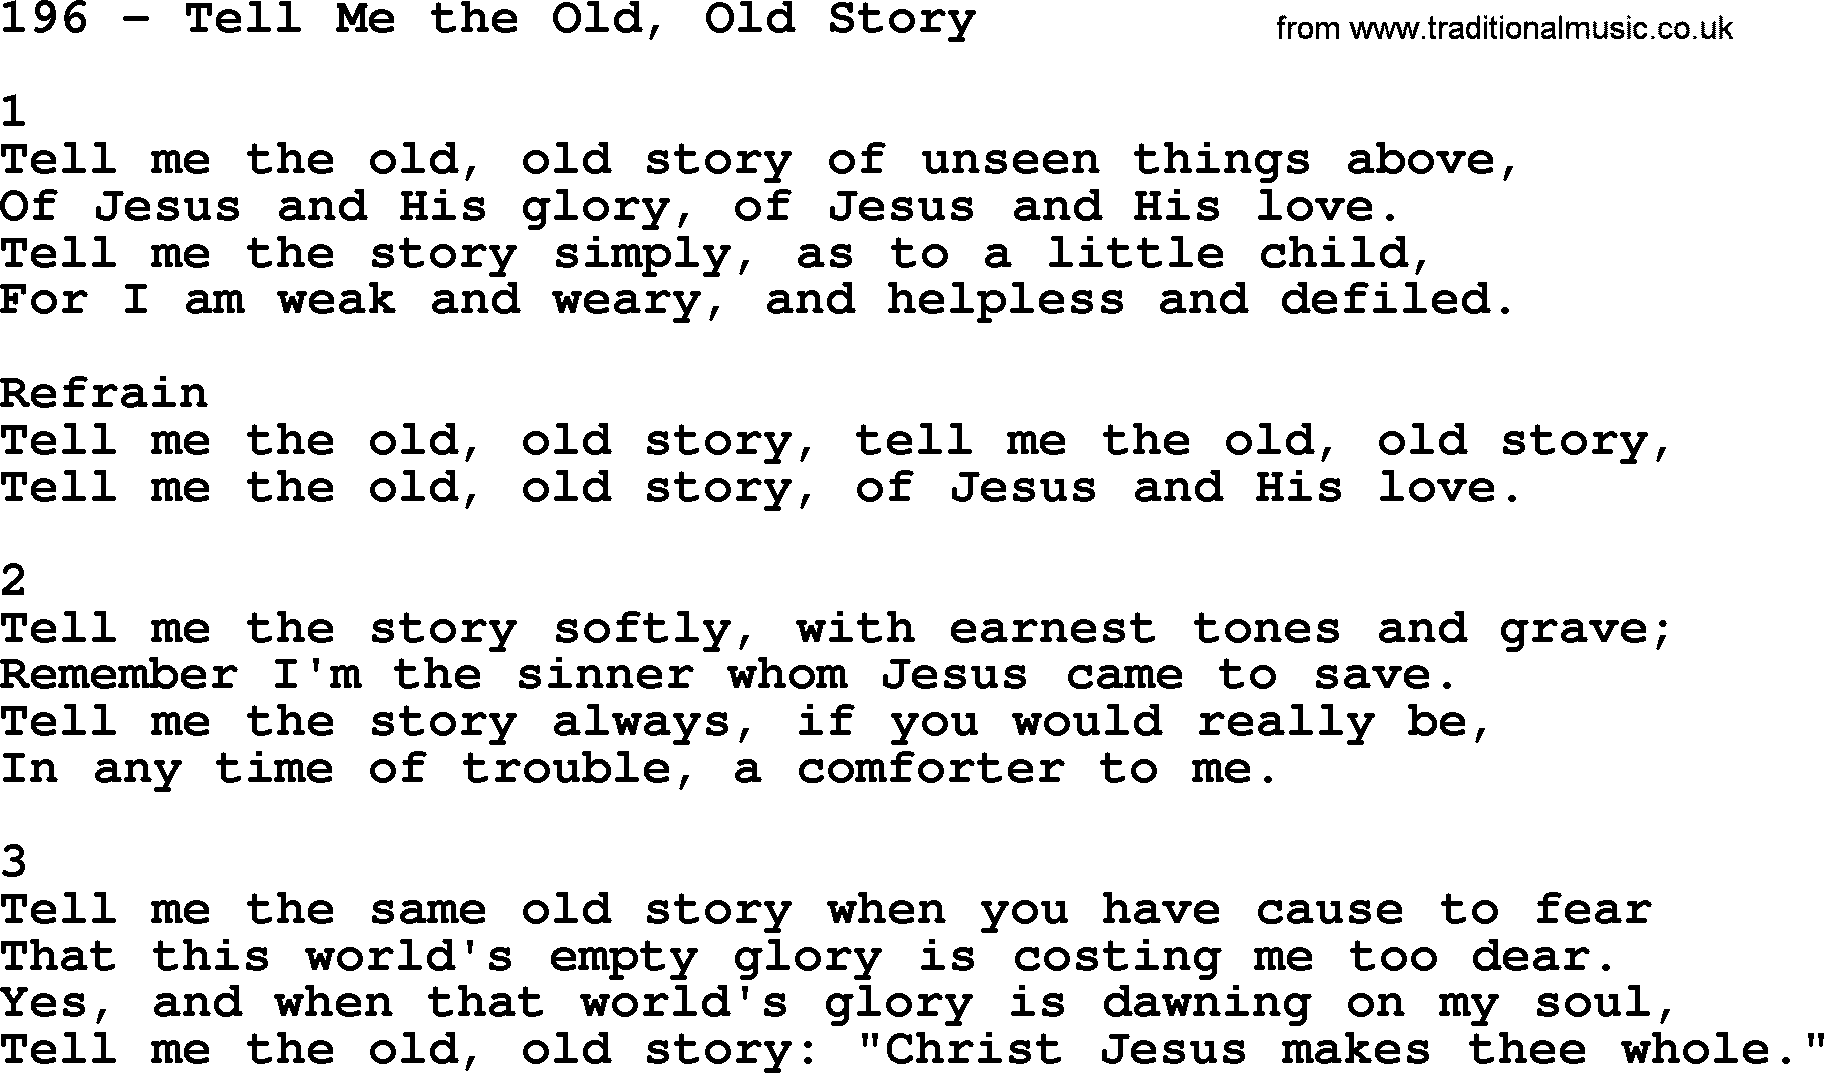 Complete Adventis Hymnal, title: 196-Tell Me The Old, Old Story, with lyrics, midi, mp3, powerpoints(PPT) and PDF,